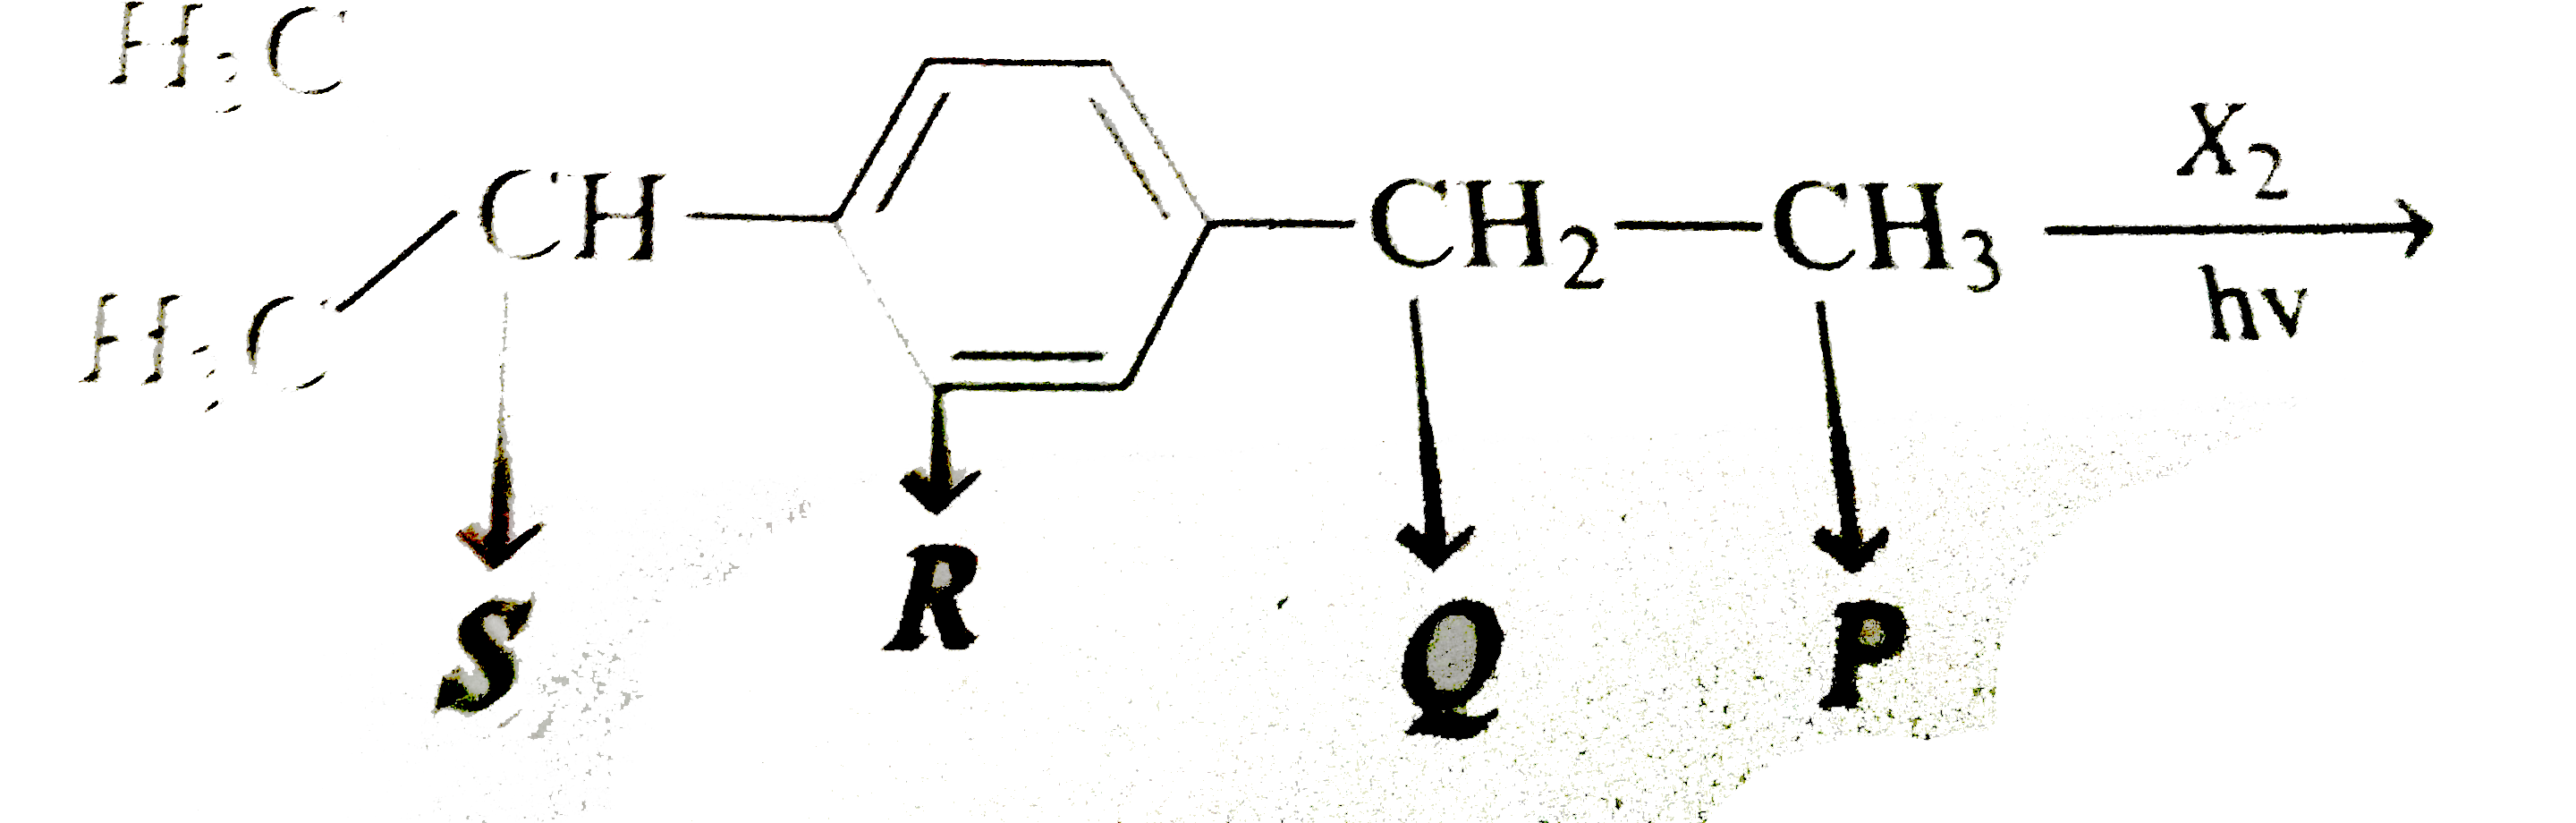 Free radical substitution chalcogenation is hown by the compunds having least one H-atom an sp^(3) hyvbridised carbon atom. Here substitution is due to free radical formation in presence of sunlight or heat or peroxide.The abstruction of H-atom is  on the basis of staability of free radical flrmed      Which of the above hydrogen can be abstracted easily by halogen in presence of sunlight?